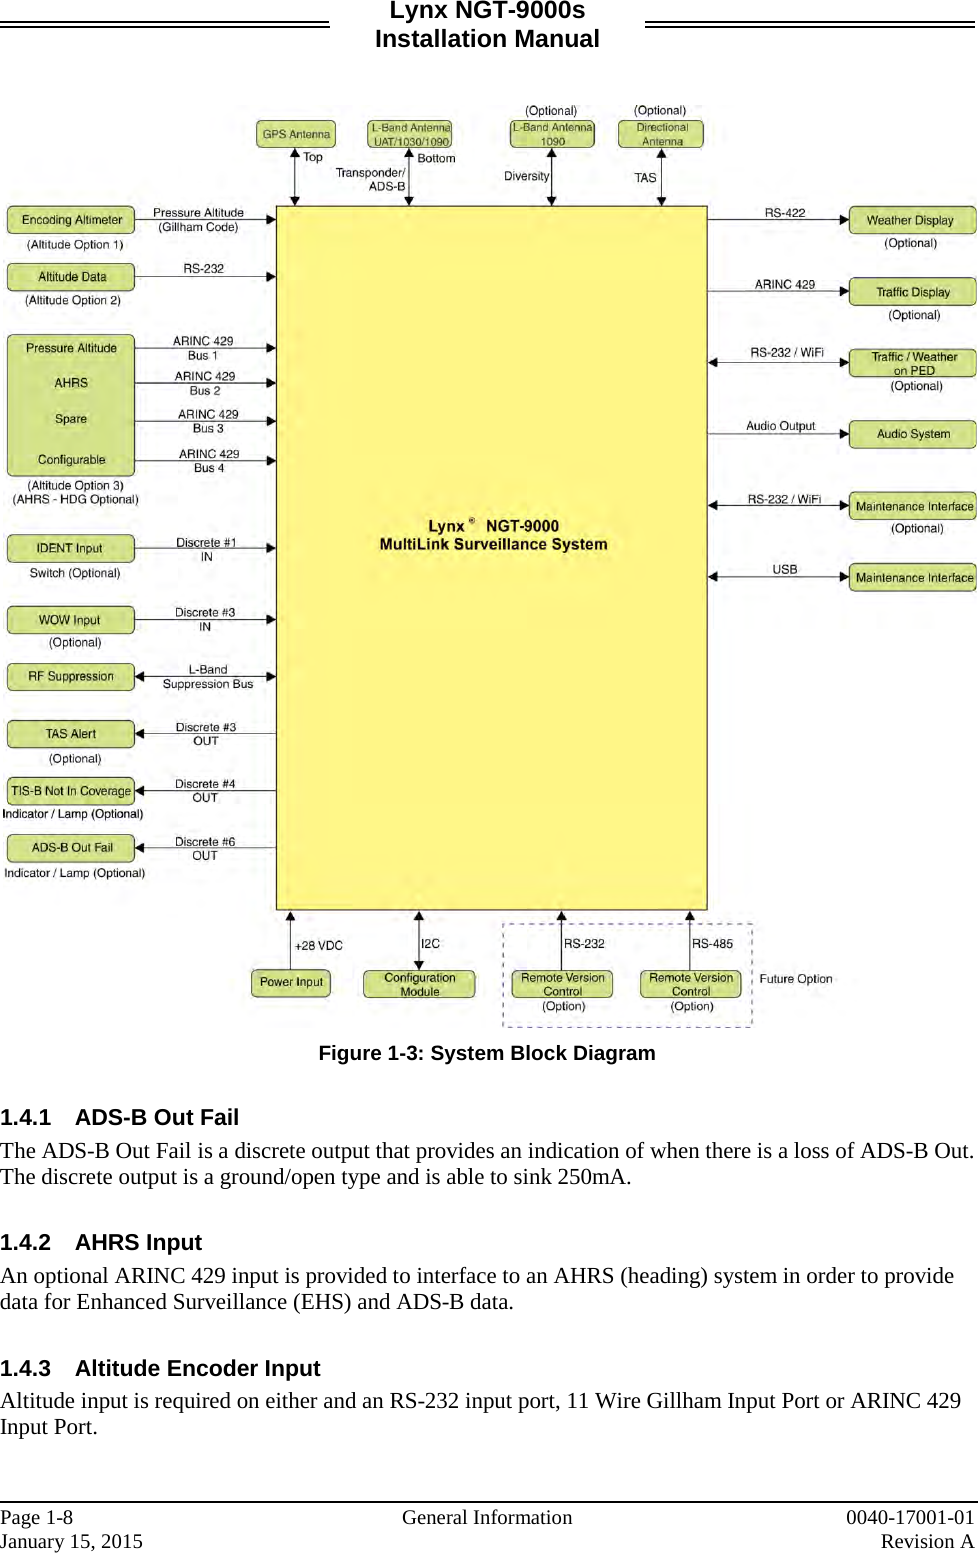 Lynx NGT-9000s Installation Manual    Figure 1-3: System Block Diagram  1.4.1 ADS-B Out Fail The ADS-B Out Fail is a discrete output that provides an indication of when there is a loss of ADS-B Out. The discrete output is a ground/open type and is able to sink 250mA.  1.4.2 AHRS Input An optional ARINC 429 input is provided to interface to an AHRS (heading) system in order to provide data for Enhanced Surveillance (EHS) and ADS-B data.   1.4.3 Altitude Encoder Input Altitude input is required on either and an RS-232 input port, 11 Wire Gillham Input Port or ARINC 429 Input Port.     Page 1-8   General Information 0040-17001-01 January 15, 2015    Revision A  